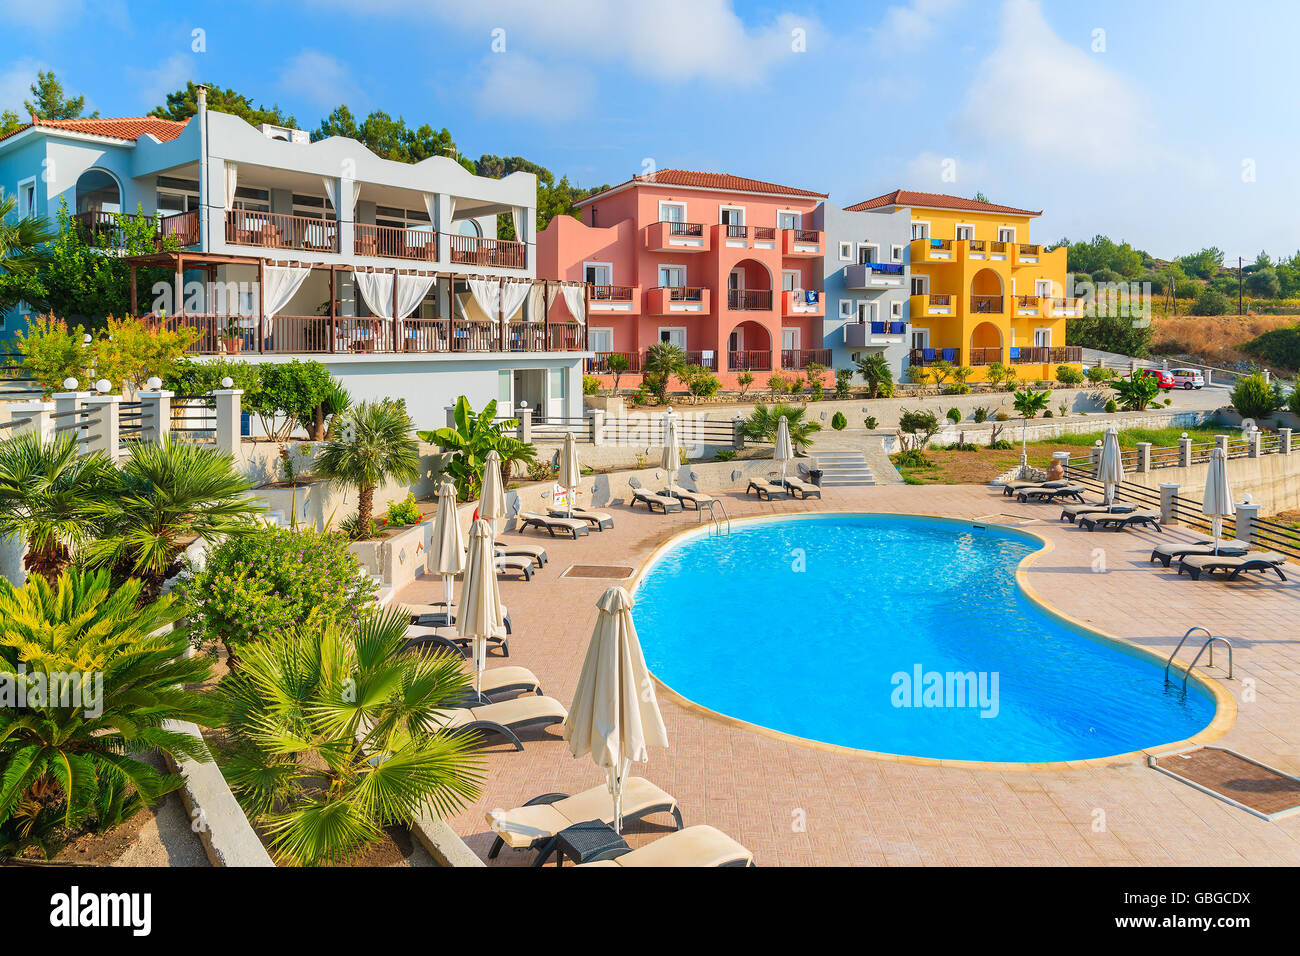 SAMOS ISLAND, GREECE - SEP 20, 2015: view of swimming pool and colorful hotel buildings on sunny summer day, Samos island, Greec Stock Photo